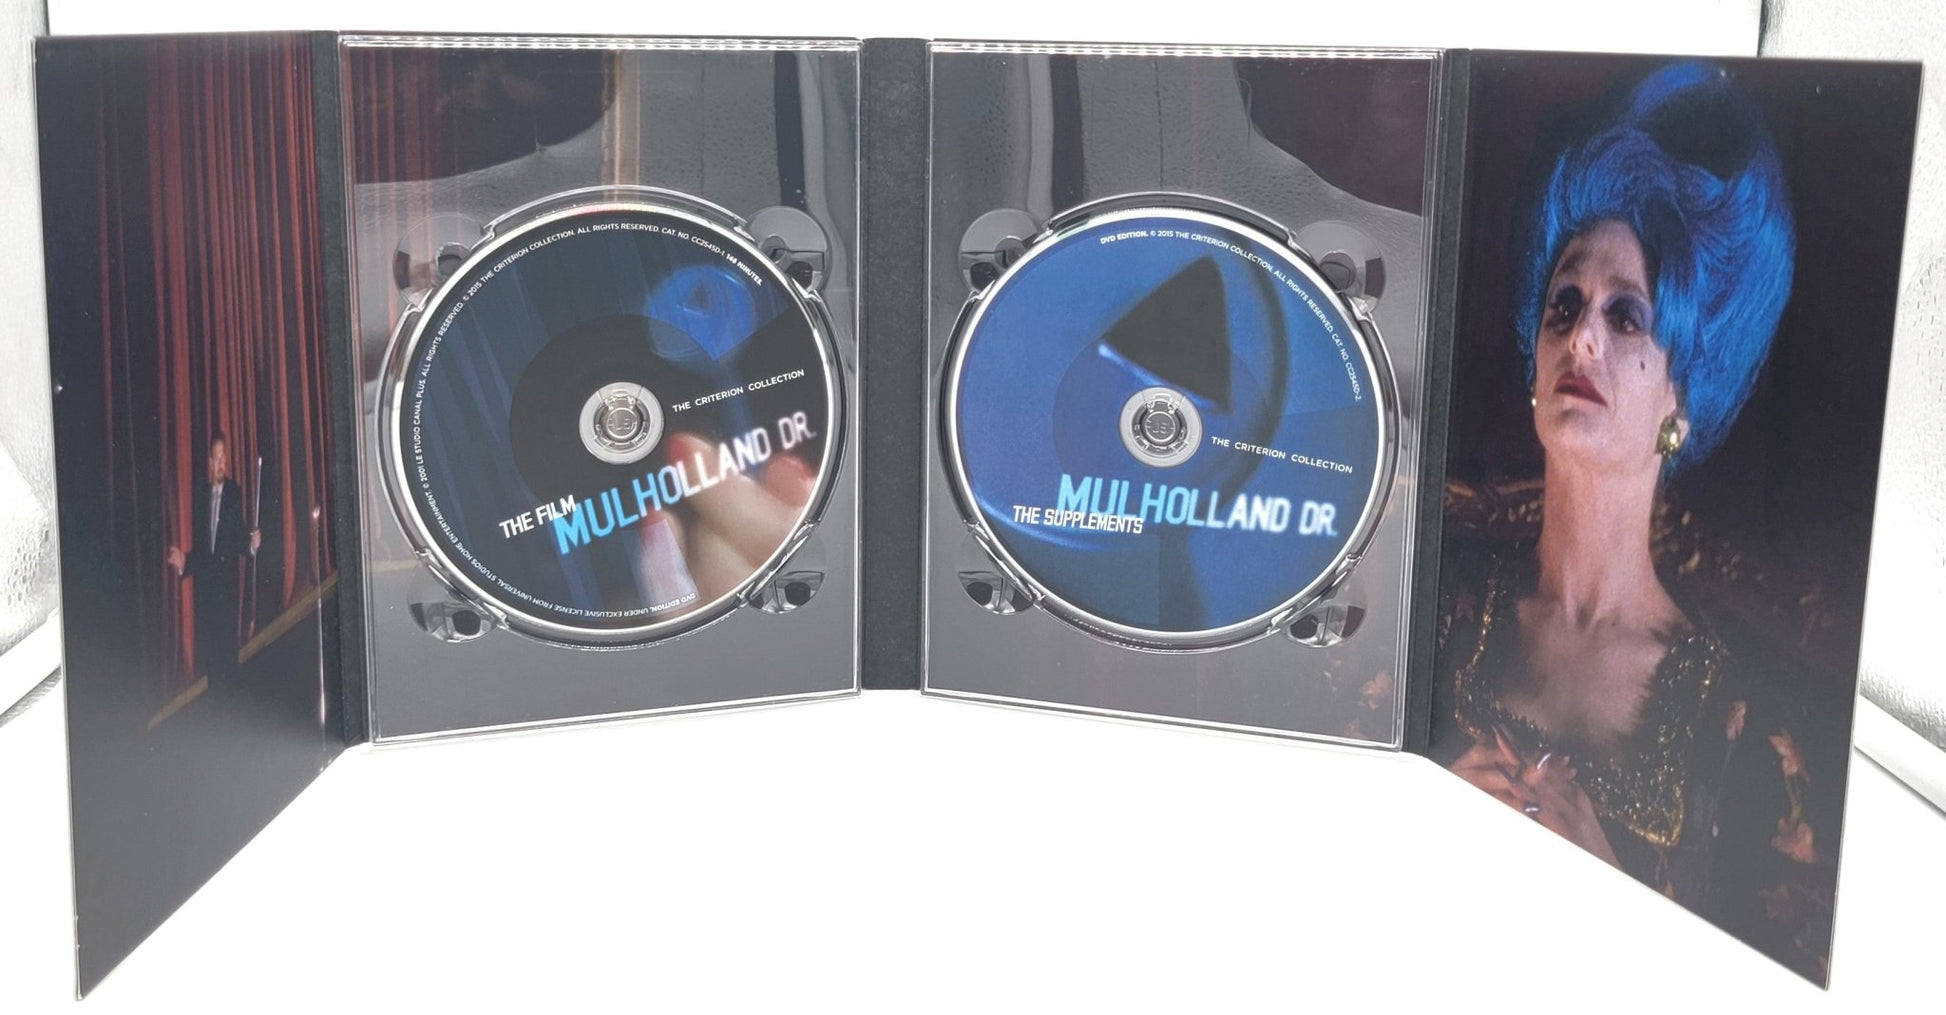 Criterion Collection - Mulholland Dr | DVD | The Criterion Collection | Book & 2 Disc Set - dvd - Steady Bunny Shop